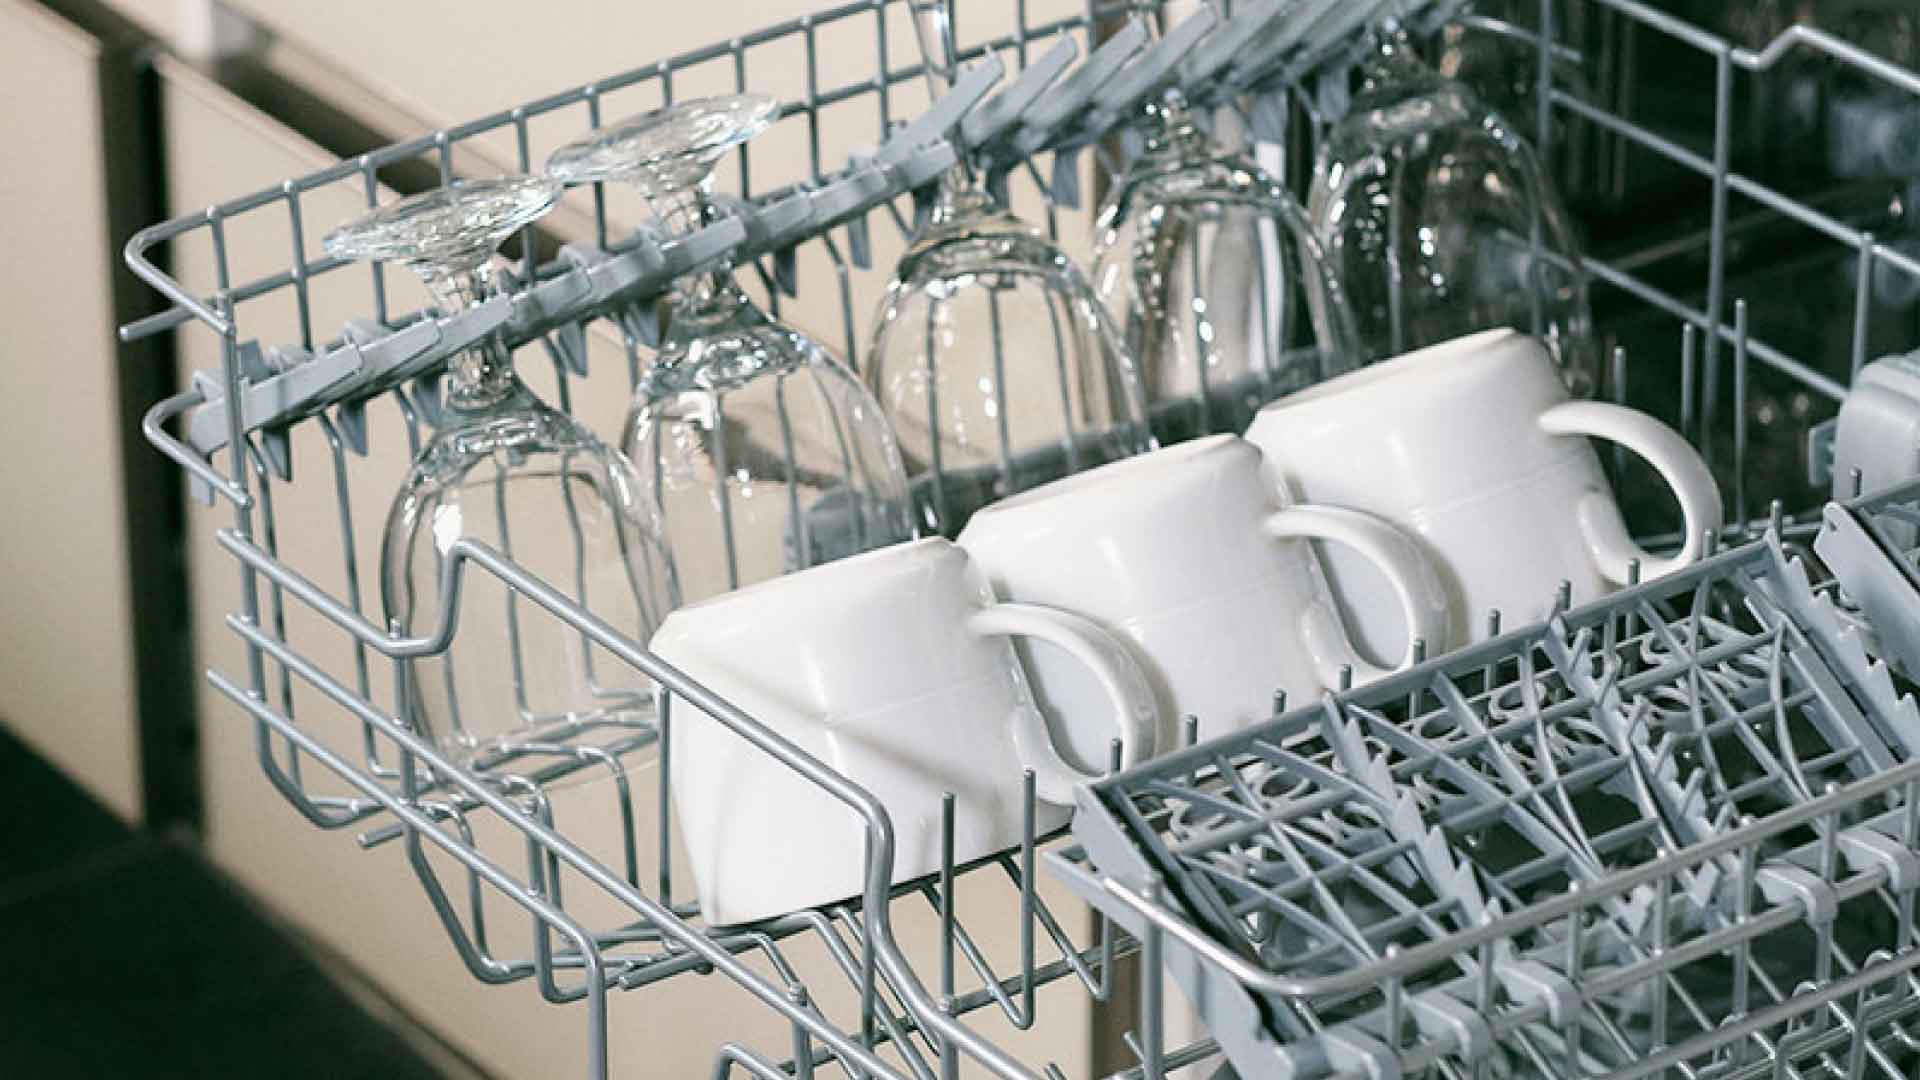 How to load a cutlery basket in a dishwasher?